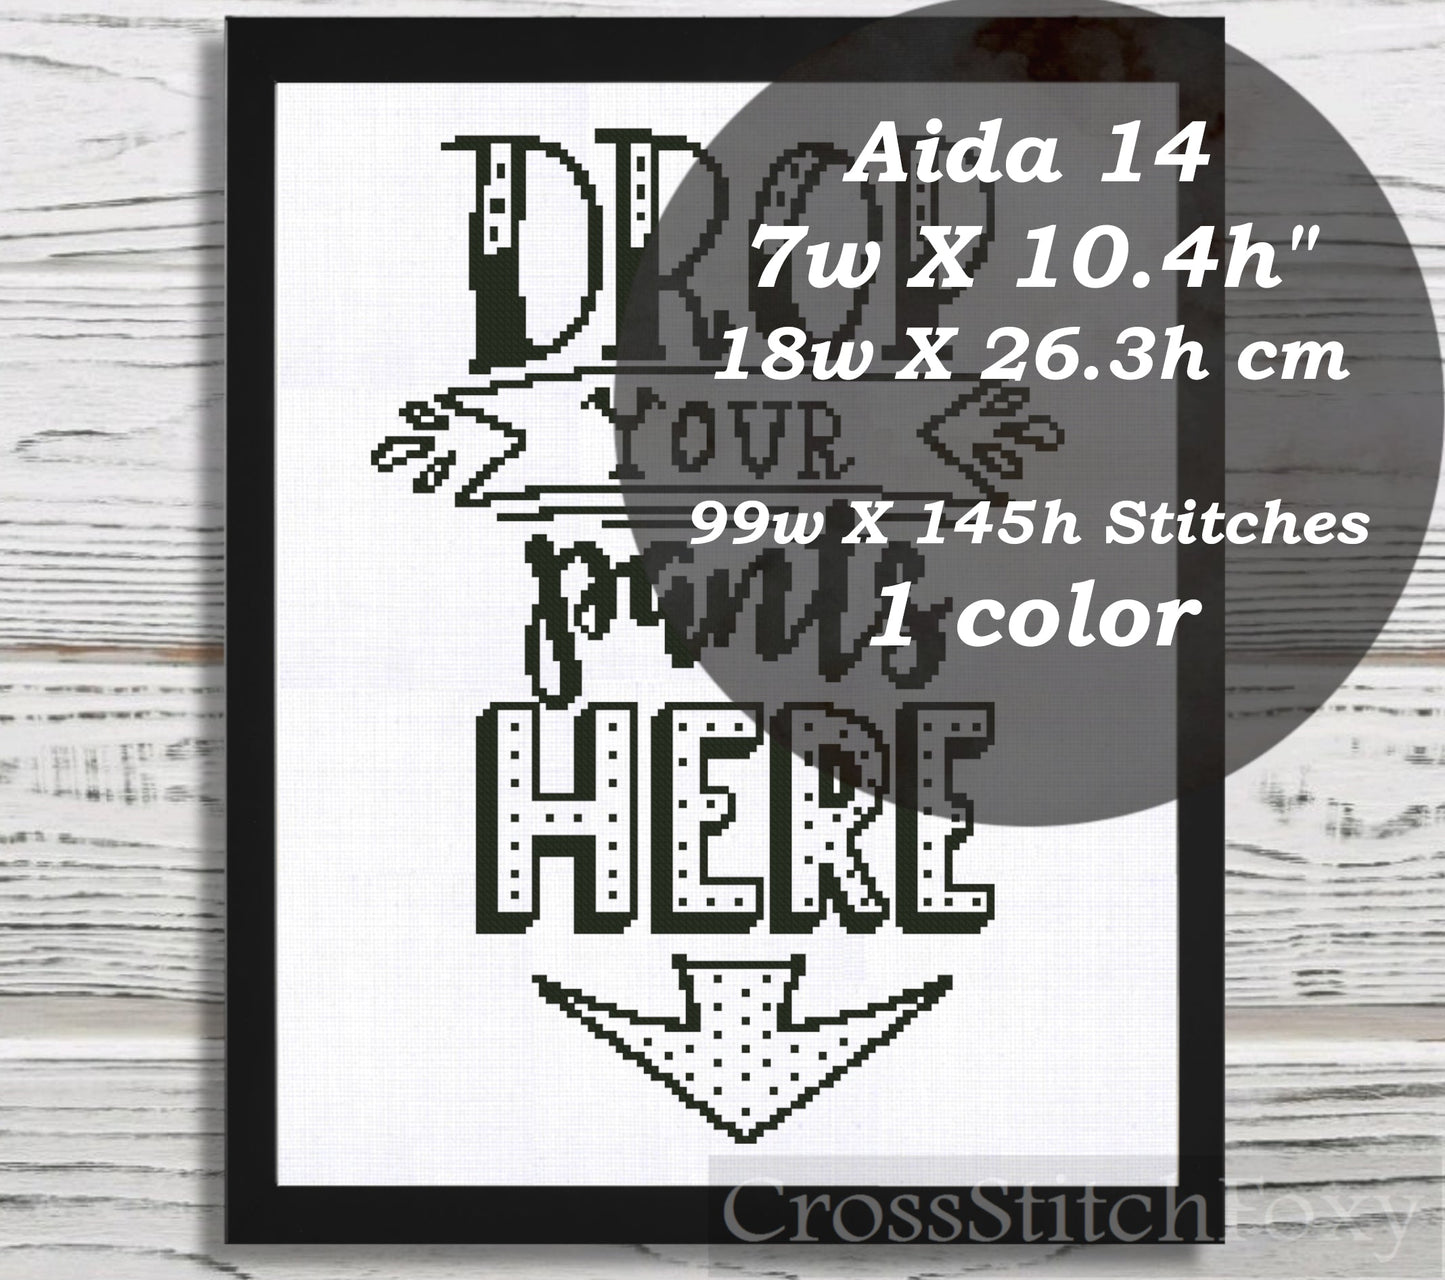 Drop Your Pants Here cross stitch pattern